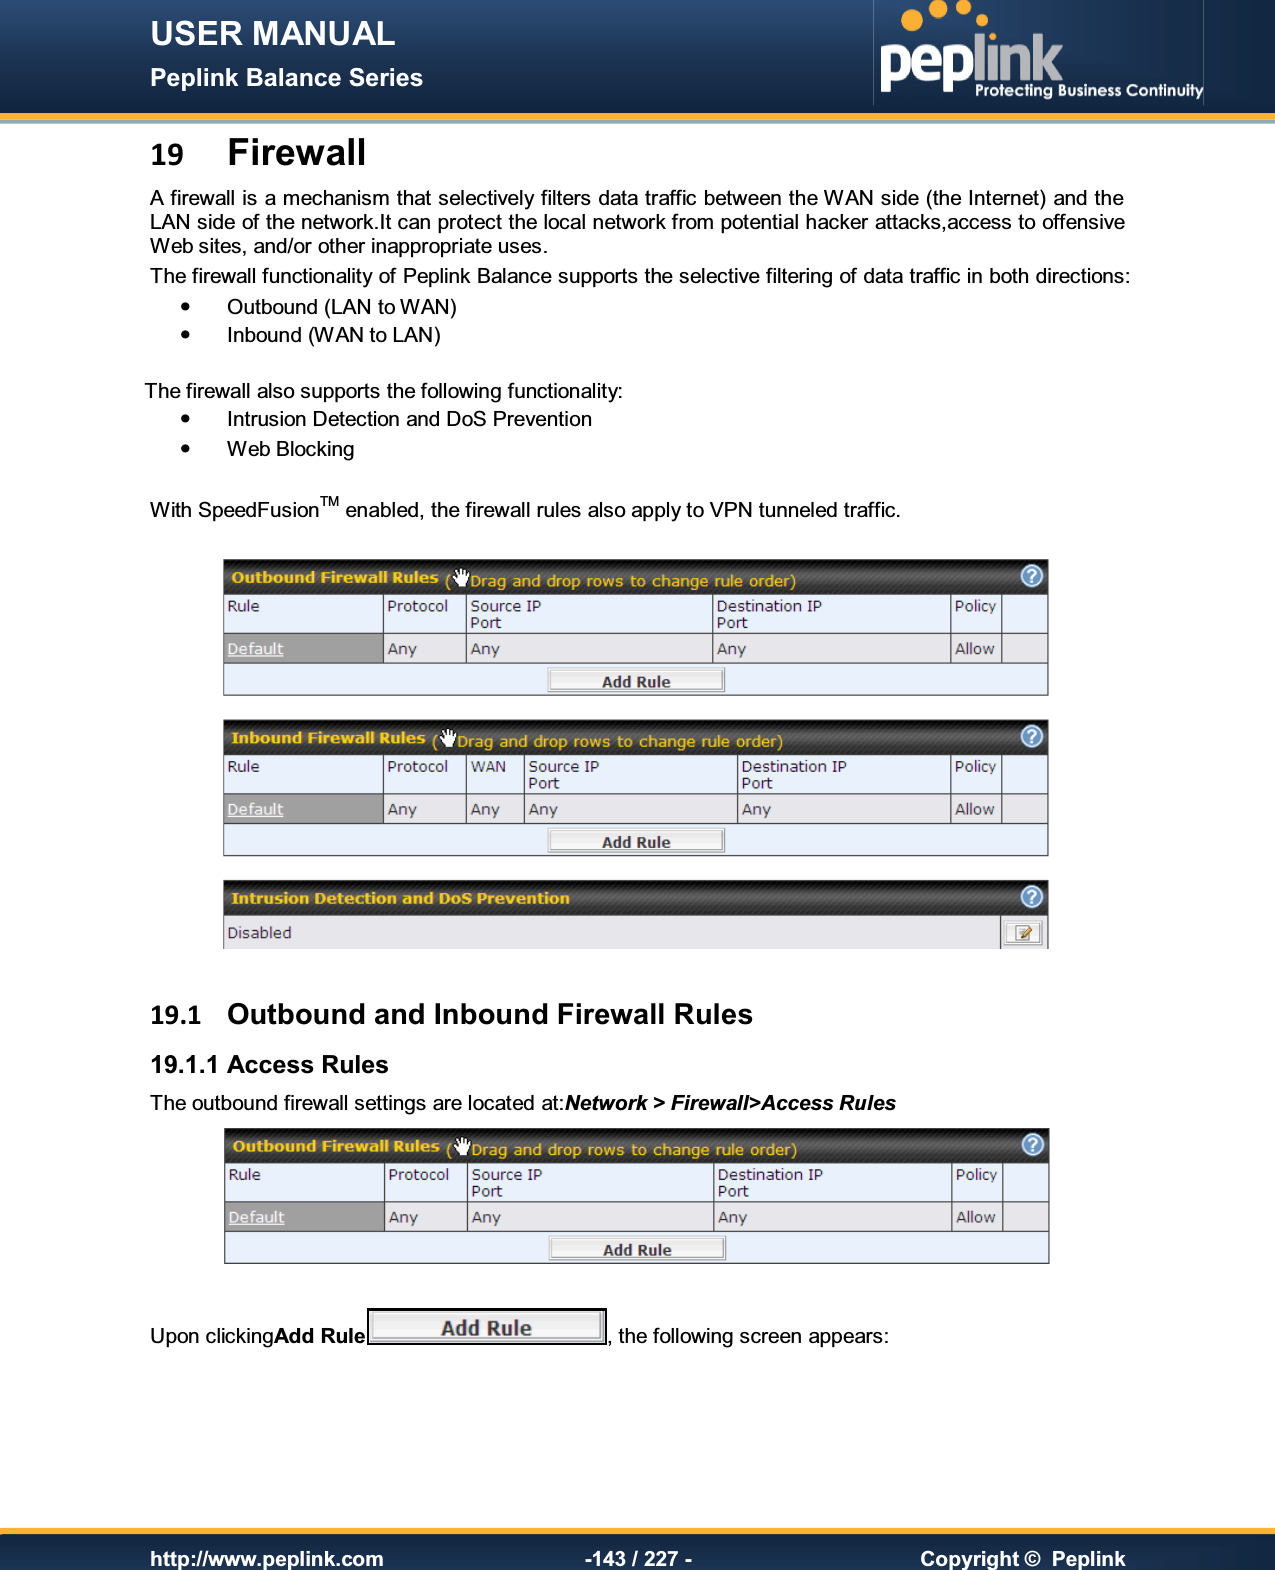 USER MANUAL Peplink Balance Series   http://www.peplink.com -143 / 227 -  Copyright ©  Peplink 19 Firewall A firewall is a mechanism that selectively filters data traffic between the WAN side (the Internet) and the LAN side of the network.It can protect the local network from potential hacker attacks,access to offensive Web sites, and/or other inappropriate uses. The firewall functionality of Peplink Balance supports the selective filtering of data traffic in both directions:   Outbound (LAN to WAN)   Inbound (WAN to LAN)  The firewall also supports the following functionality:   Intrusion Detection and DoS Prevention   Web Blocking  With SpeedFusionTM enabled, the firewall rules also apply to VPN tunneled traffic.    19.1  Outbound and Inbound Firewall Rules 19.1.1 Access Rules The outbound firewall settings are located at:Network &gt; Firewall&gt;Access Rules   Upon clickingAdd Rule , the following screen appears:  